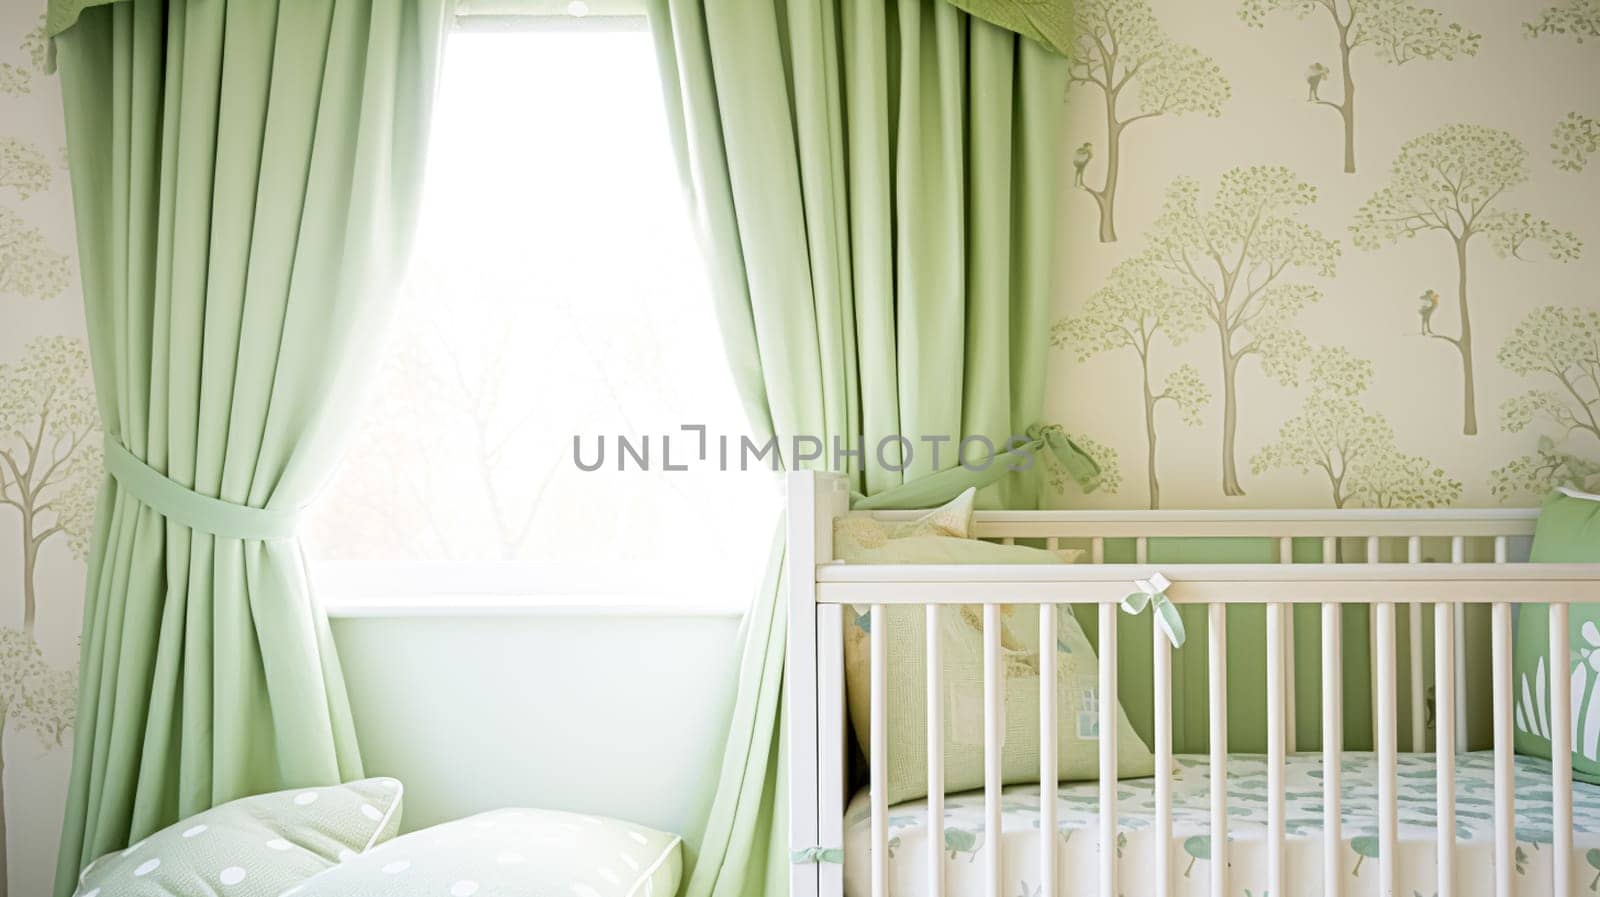 Baby room decor and interior design inspiration in the English countryside style cottage by Anneleven